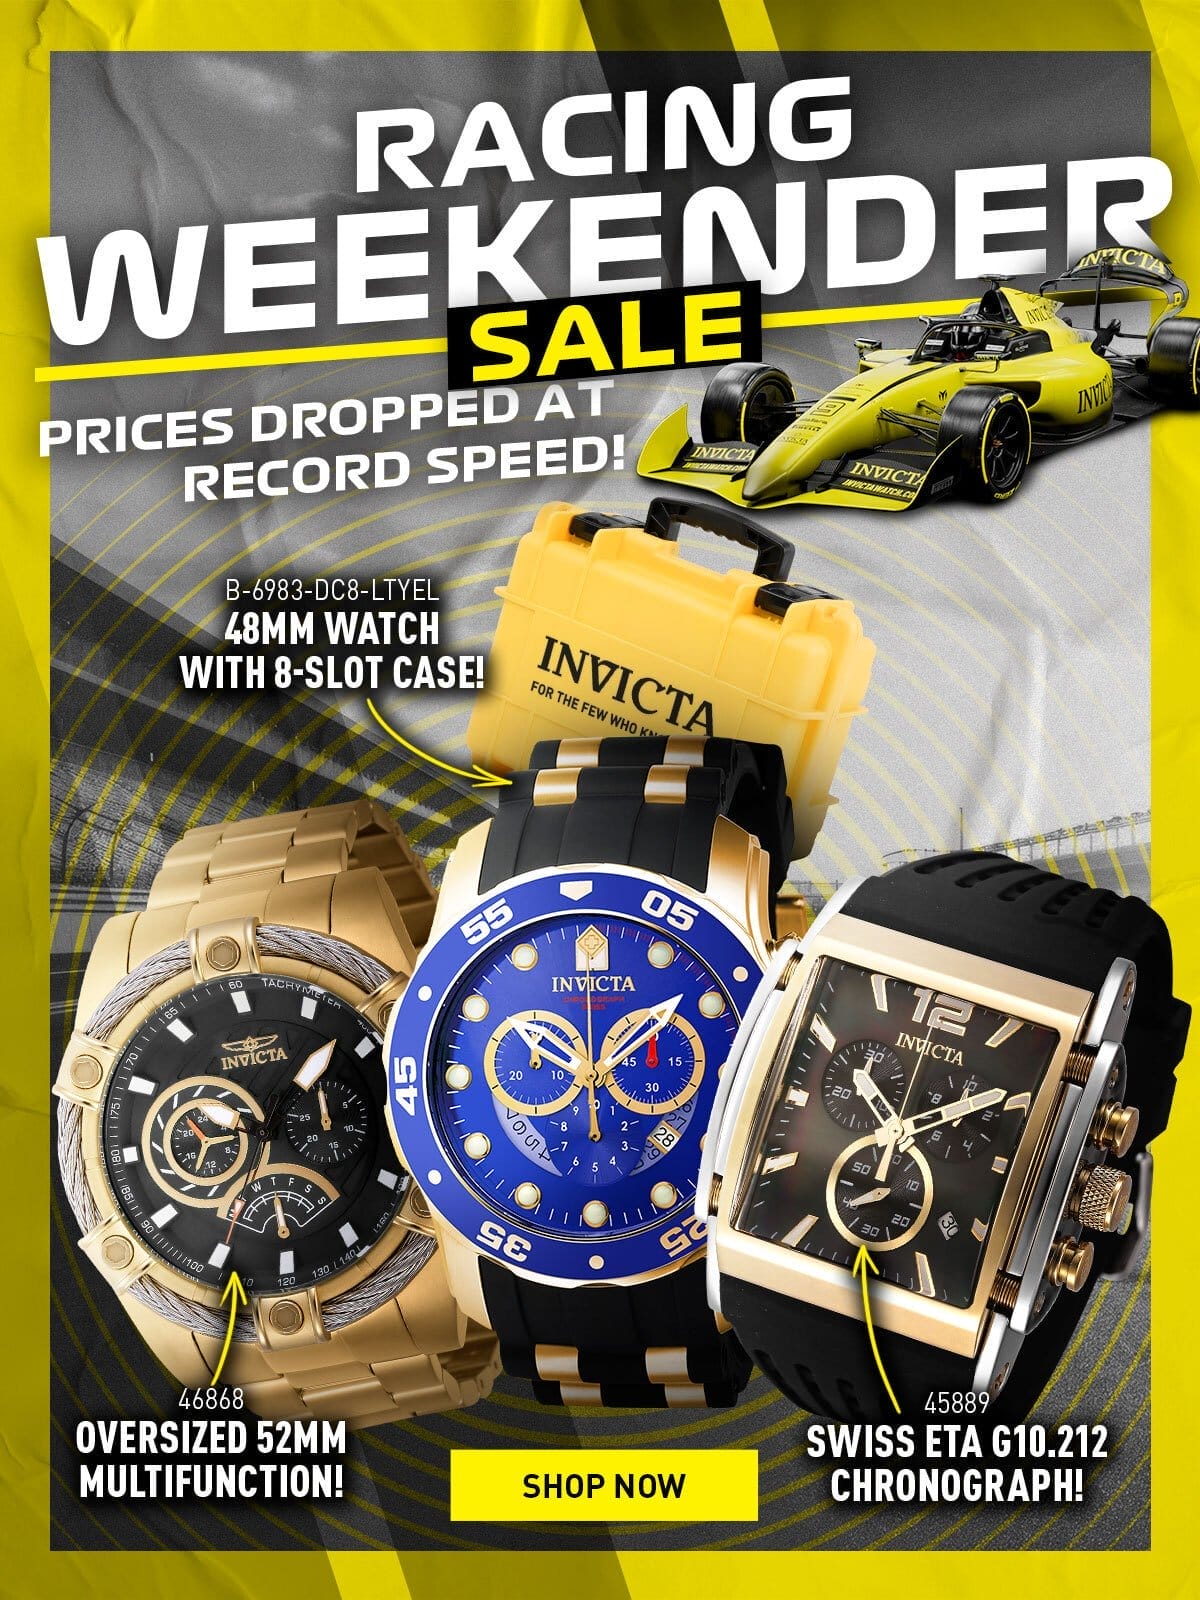 Racing Weekender Sale - Prices dropped at record speed!